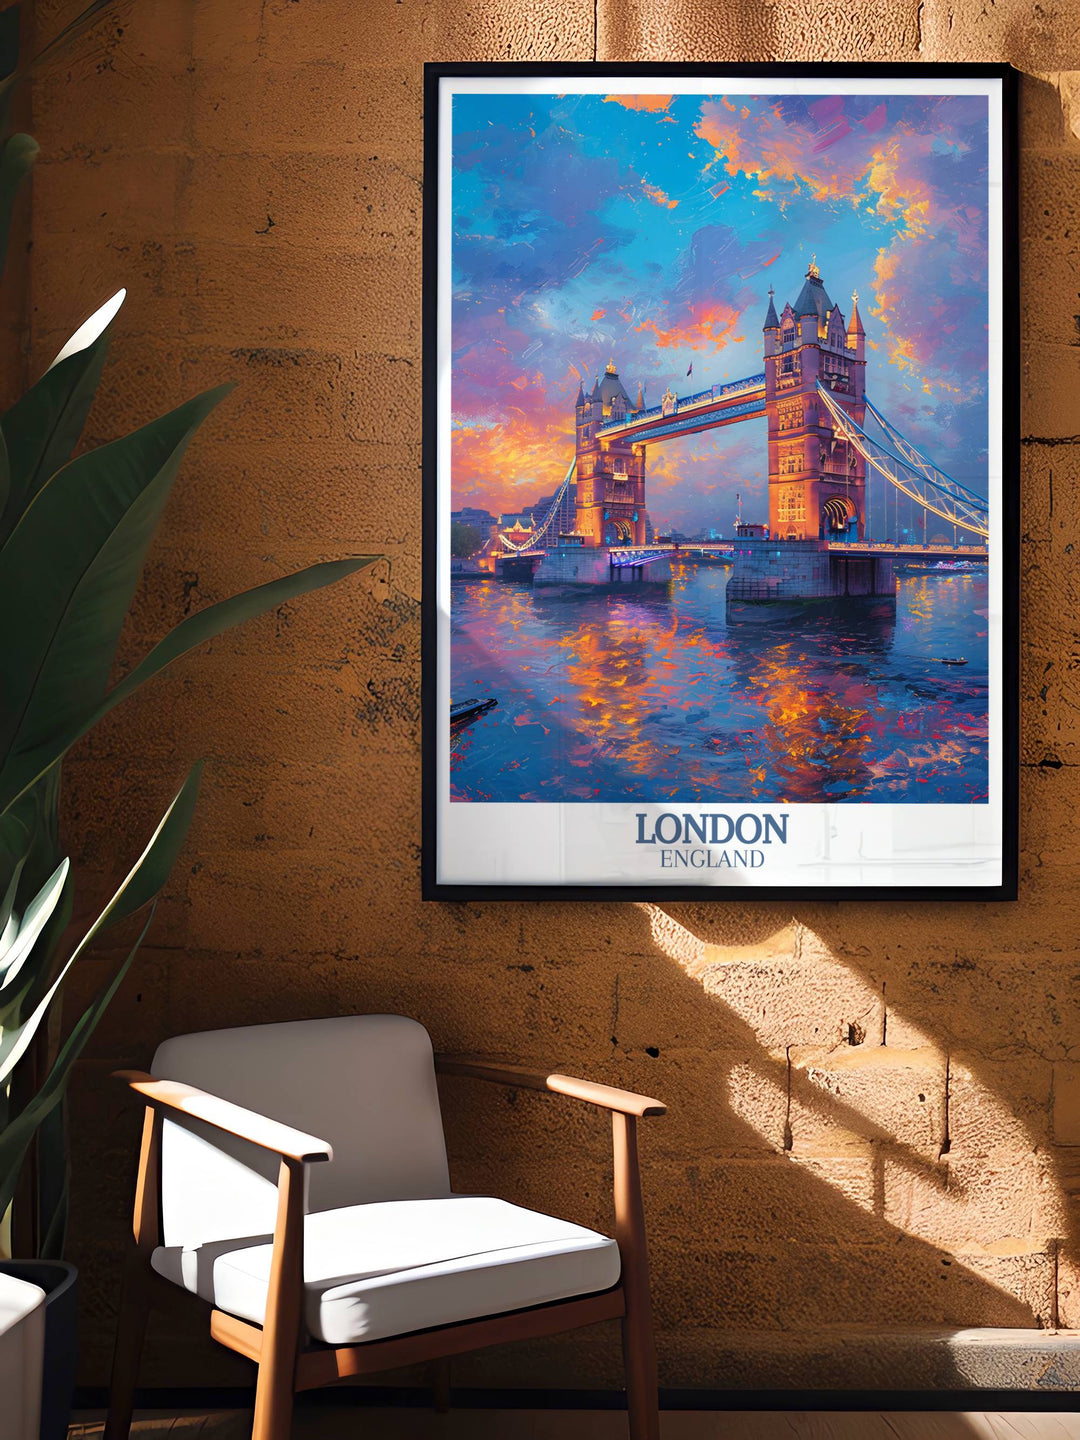 Artistic representation of historical London, featuring landmarks like Tower Bridge in a vintage style.